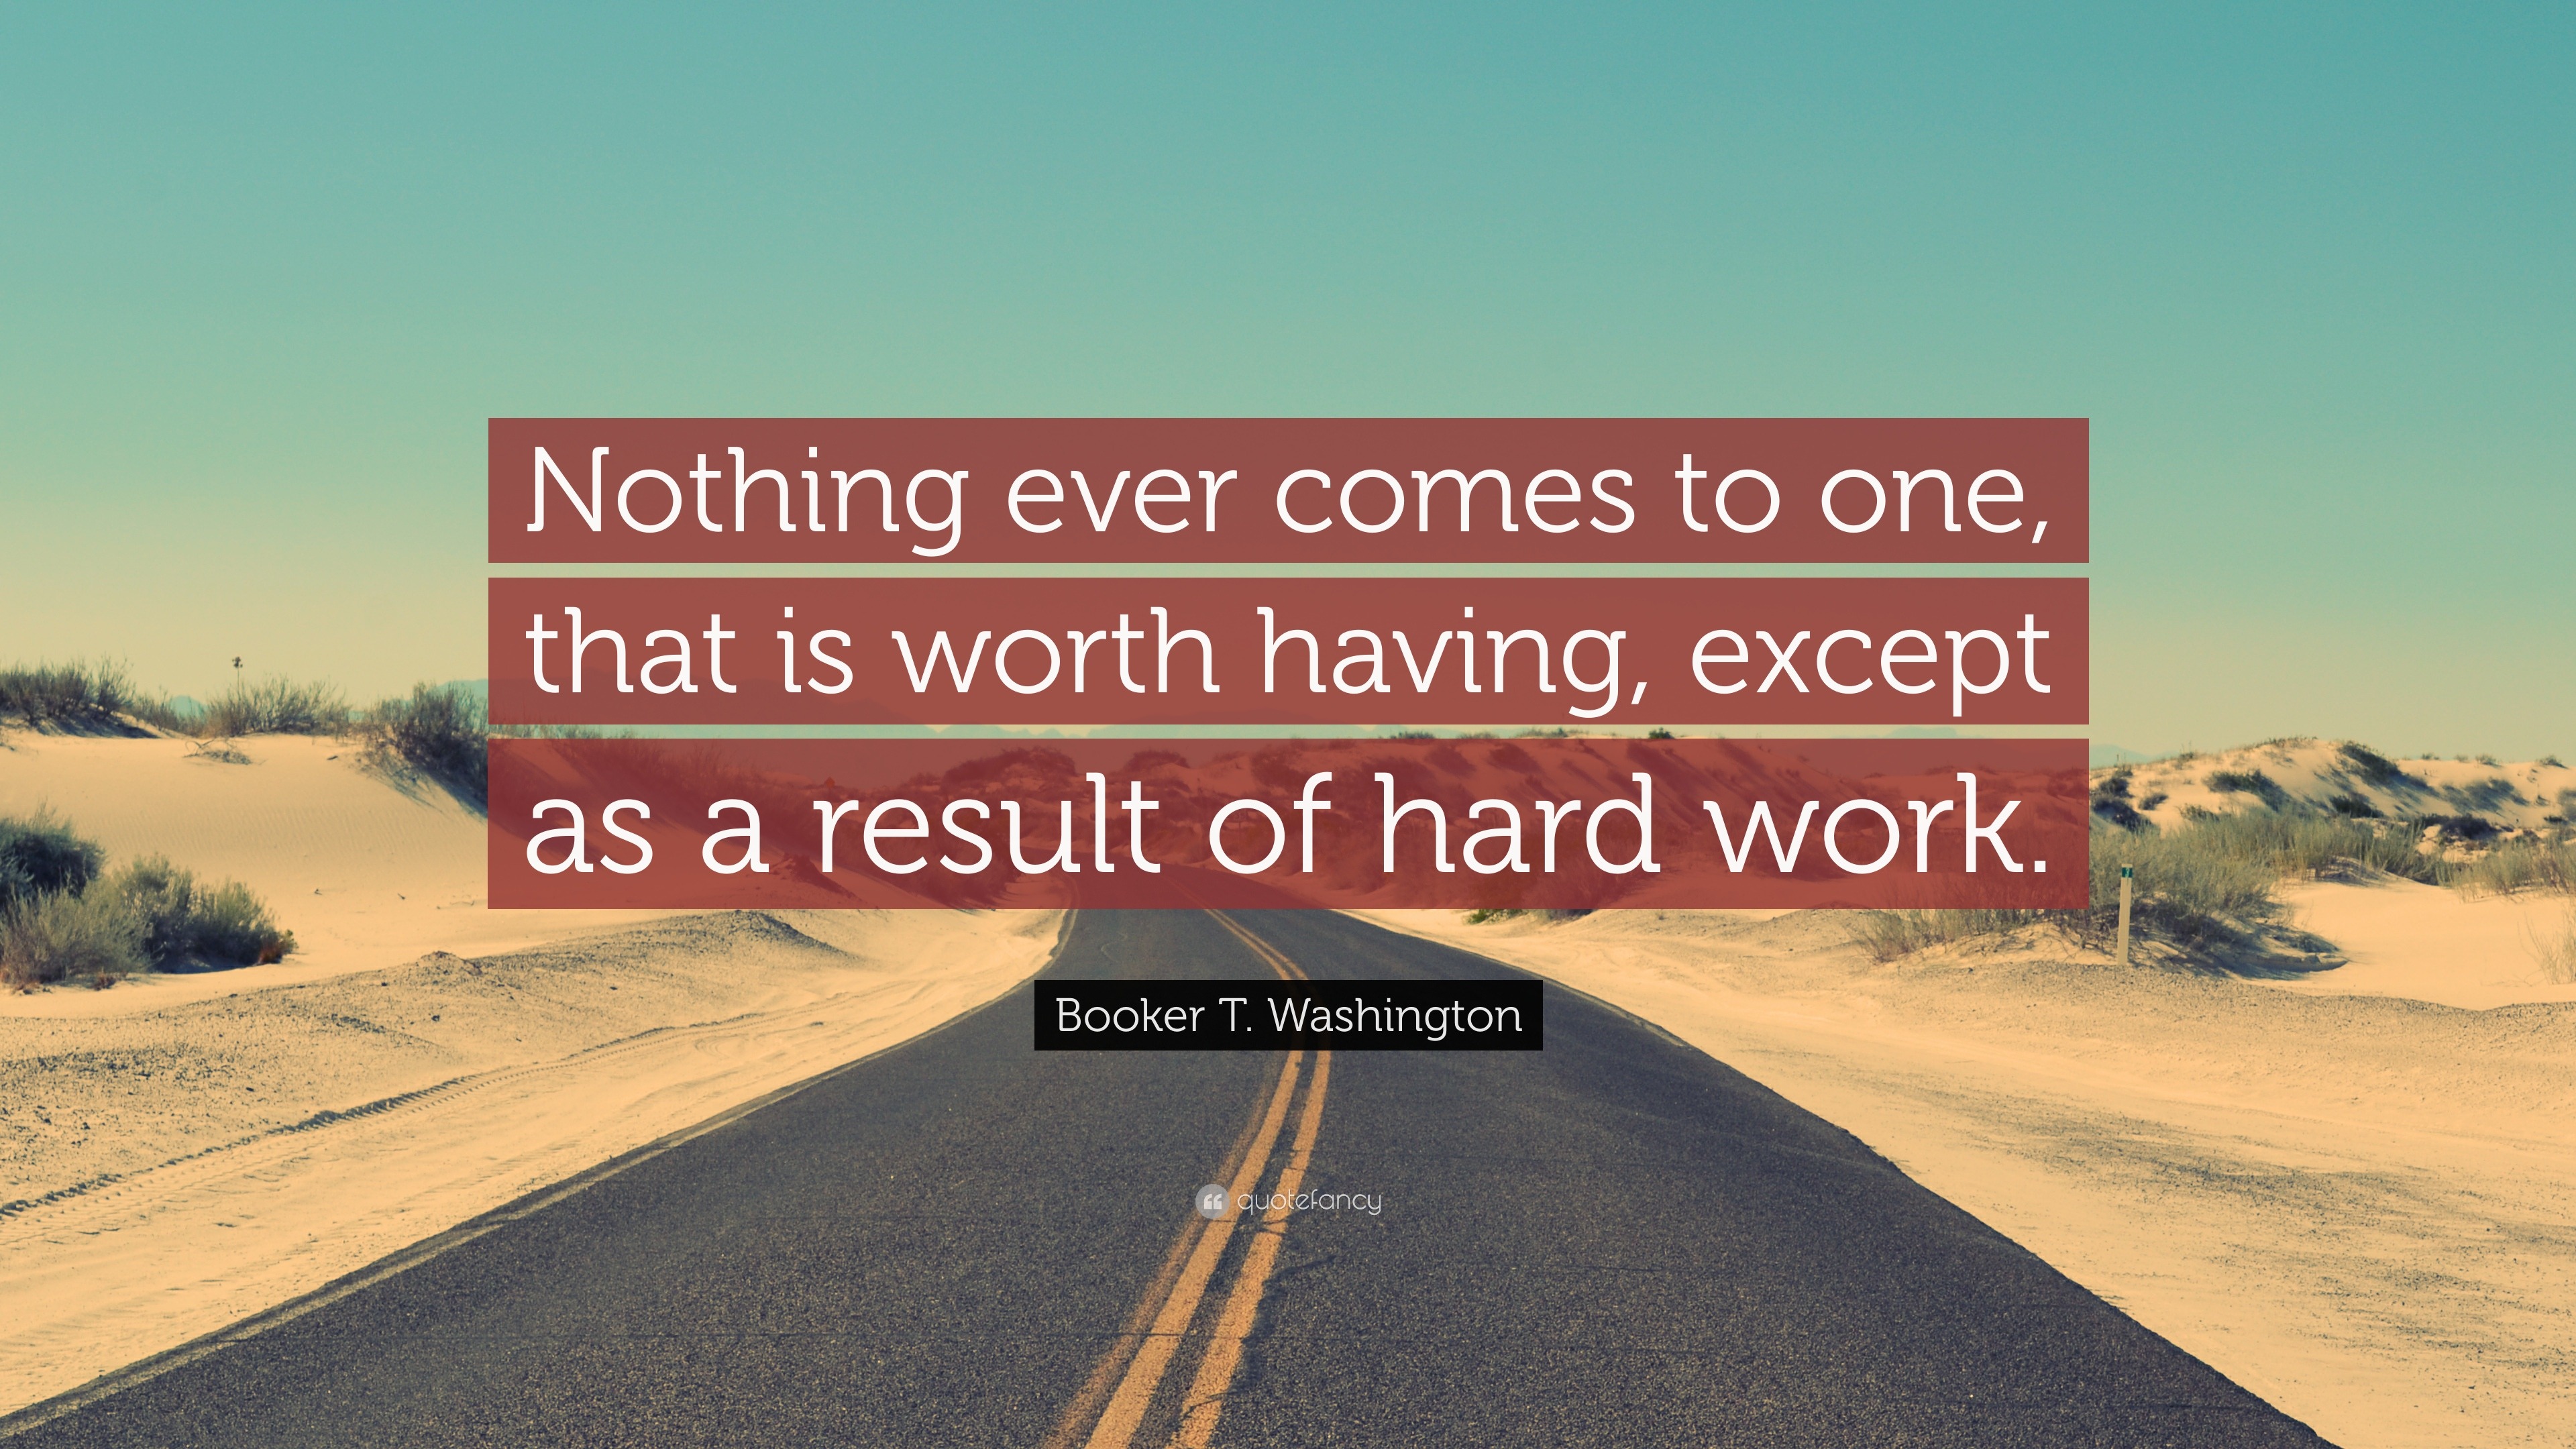 Booker T. Washington Quote: “Nothing ever comes to one, that is worth ...